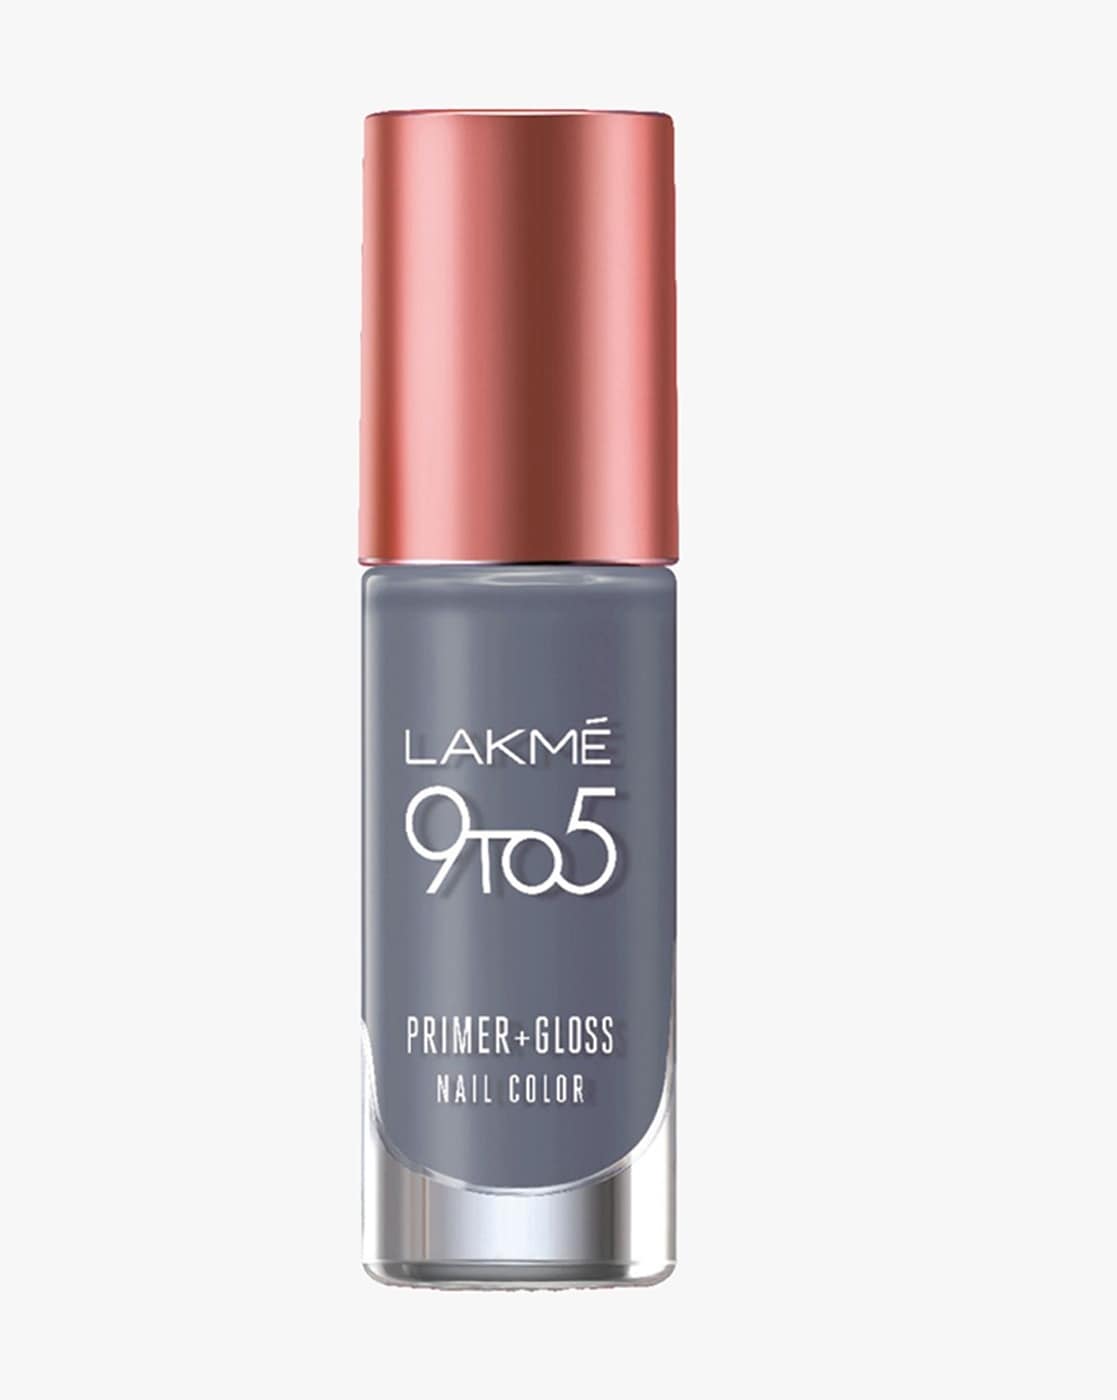 Lakme True Wear Nail Polish Reds and Maroons 401 Long Lasting Gel Nail Paint  for Women - Glossy Finish Chip Resistant Nails 9 ml - the best price and  delivery | Globally